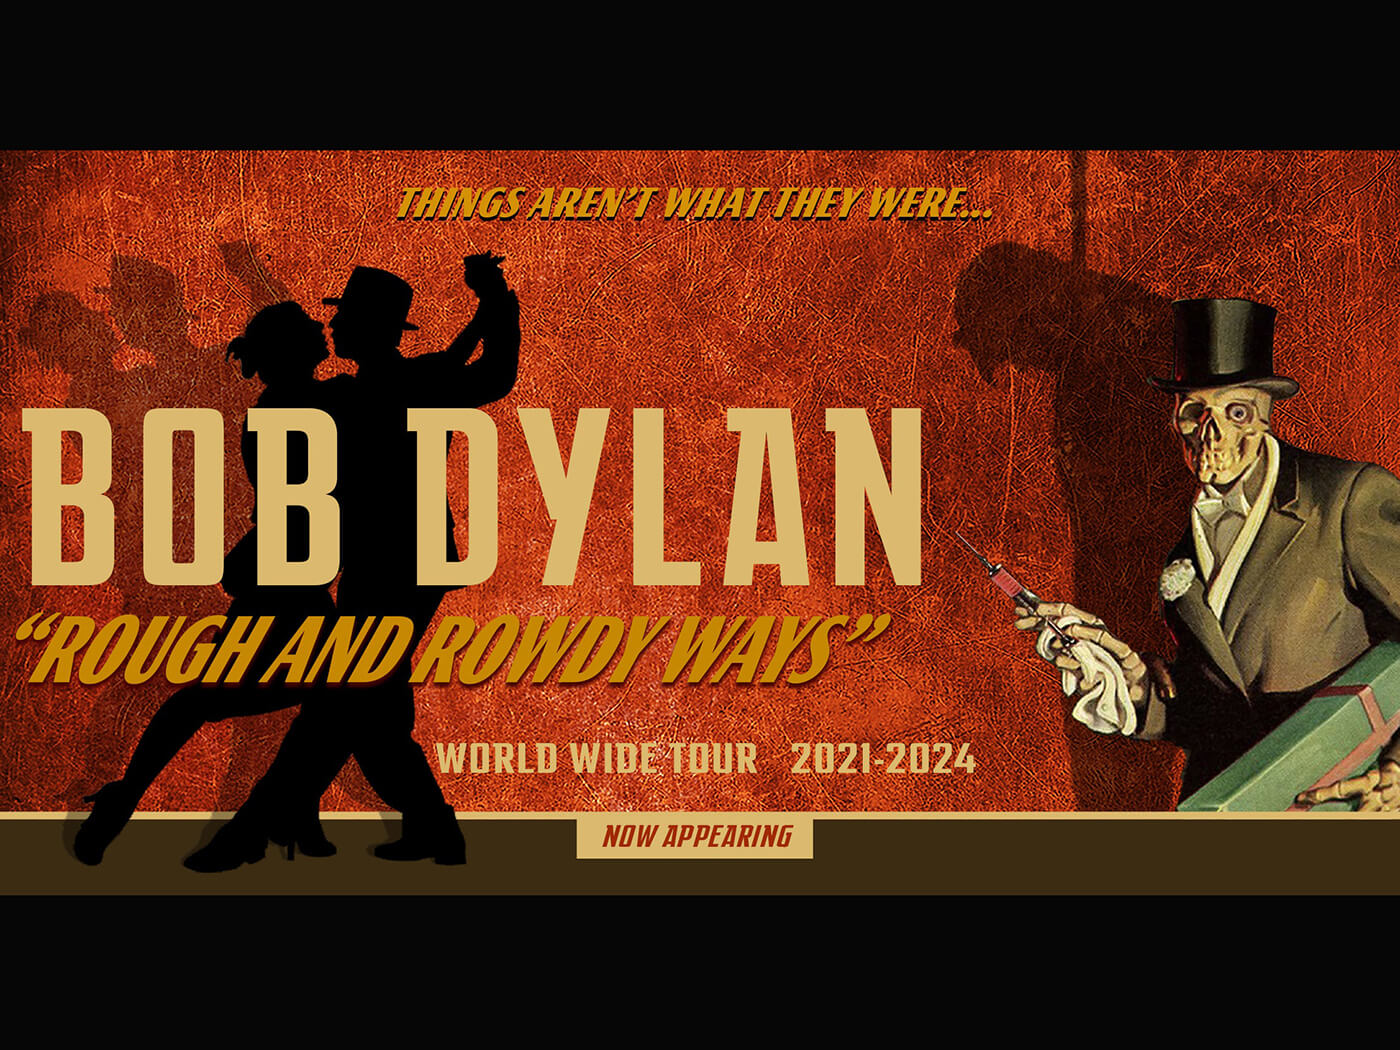 Bob Dylan’s Rough And Rowdy Ways Tour continues! Show 9: Berlin, Night 3